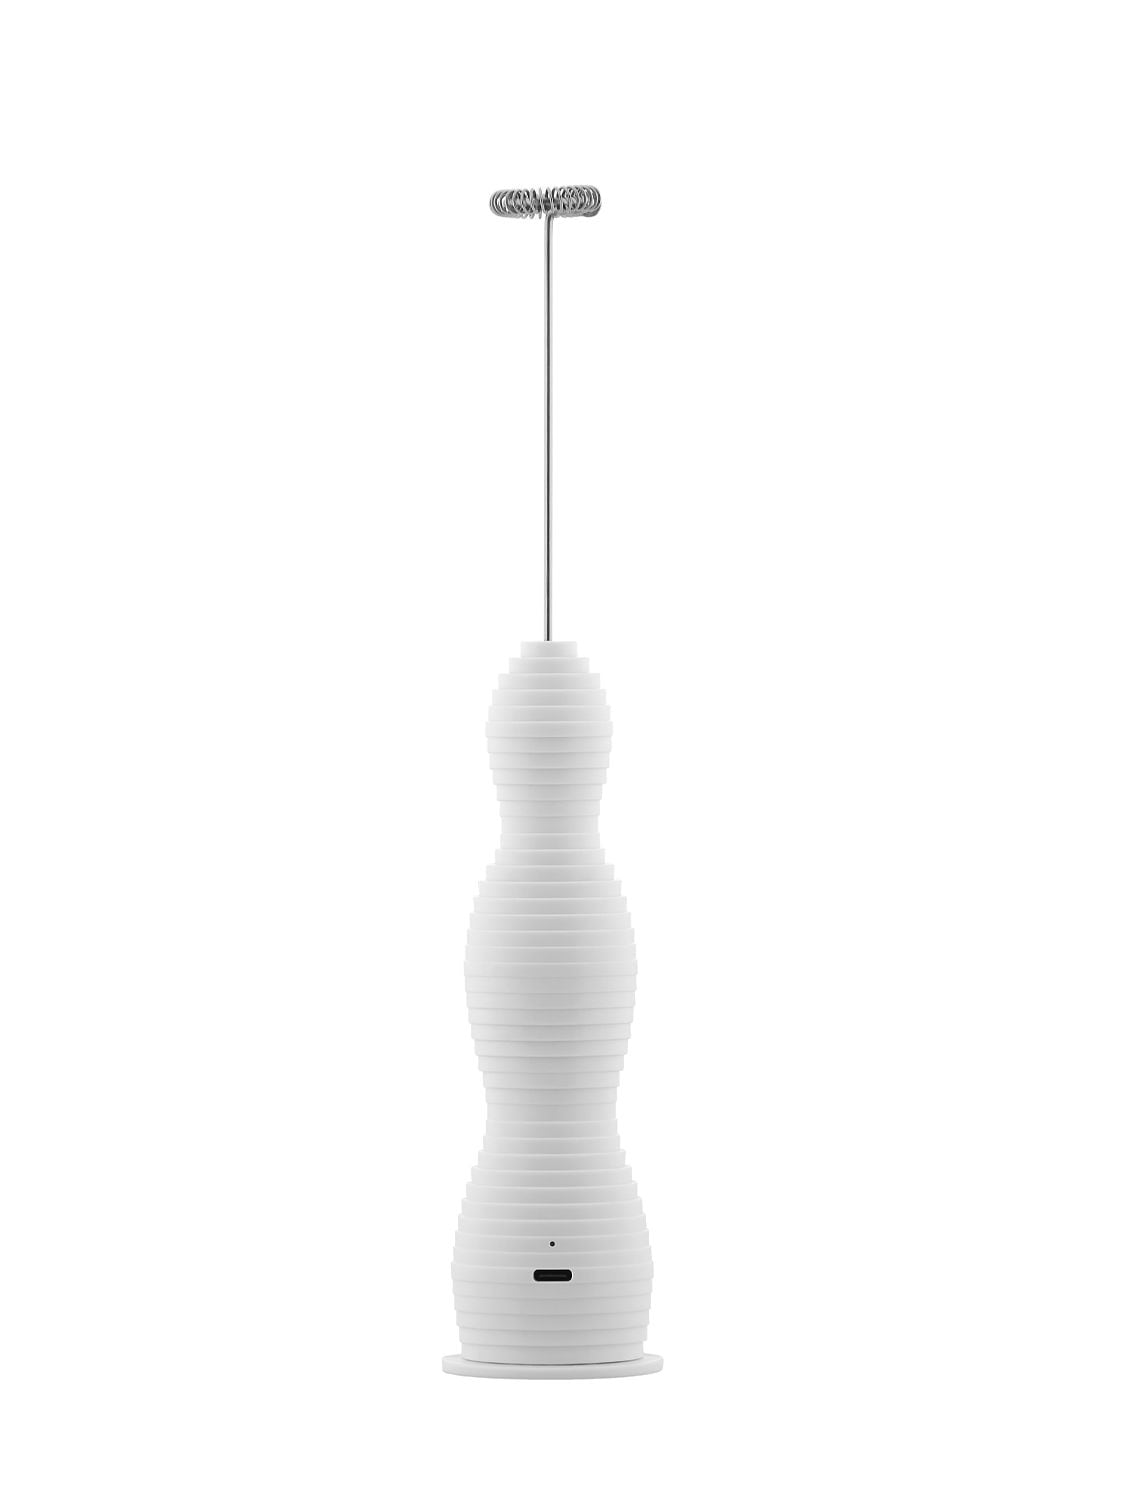 Shop Alessi Pulcina Milk Frother In White